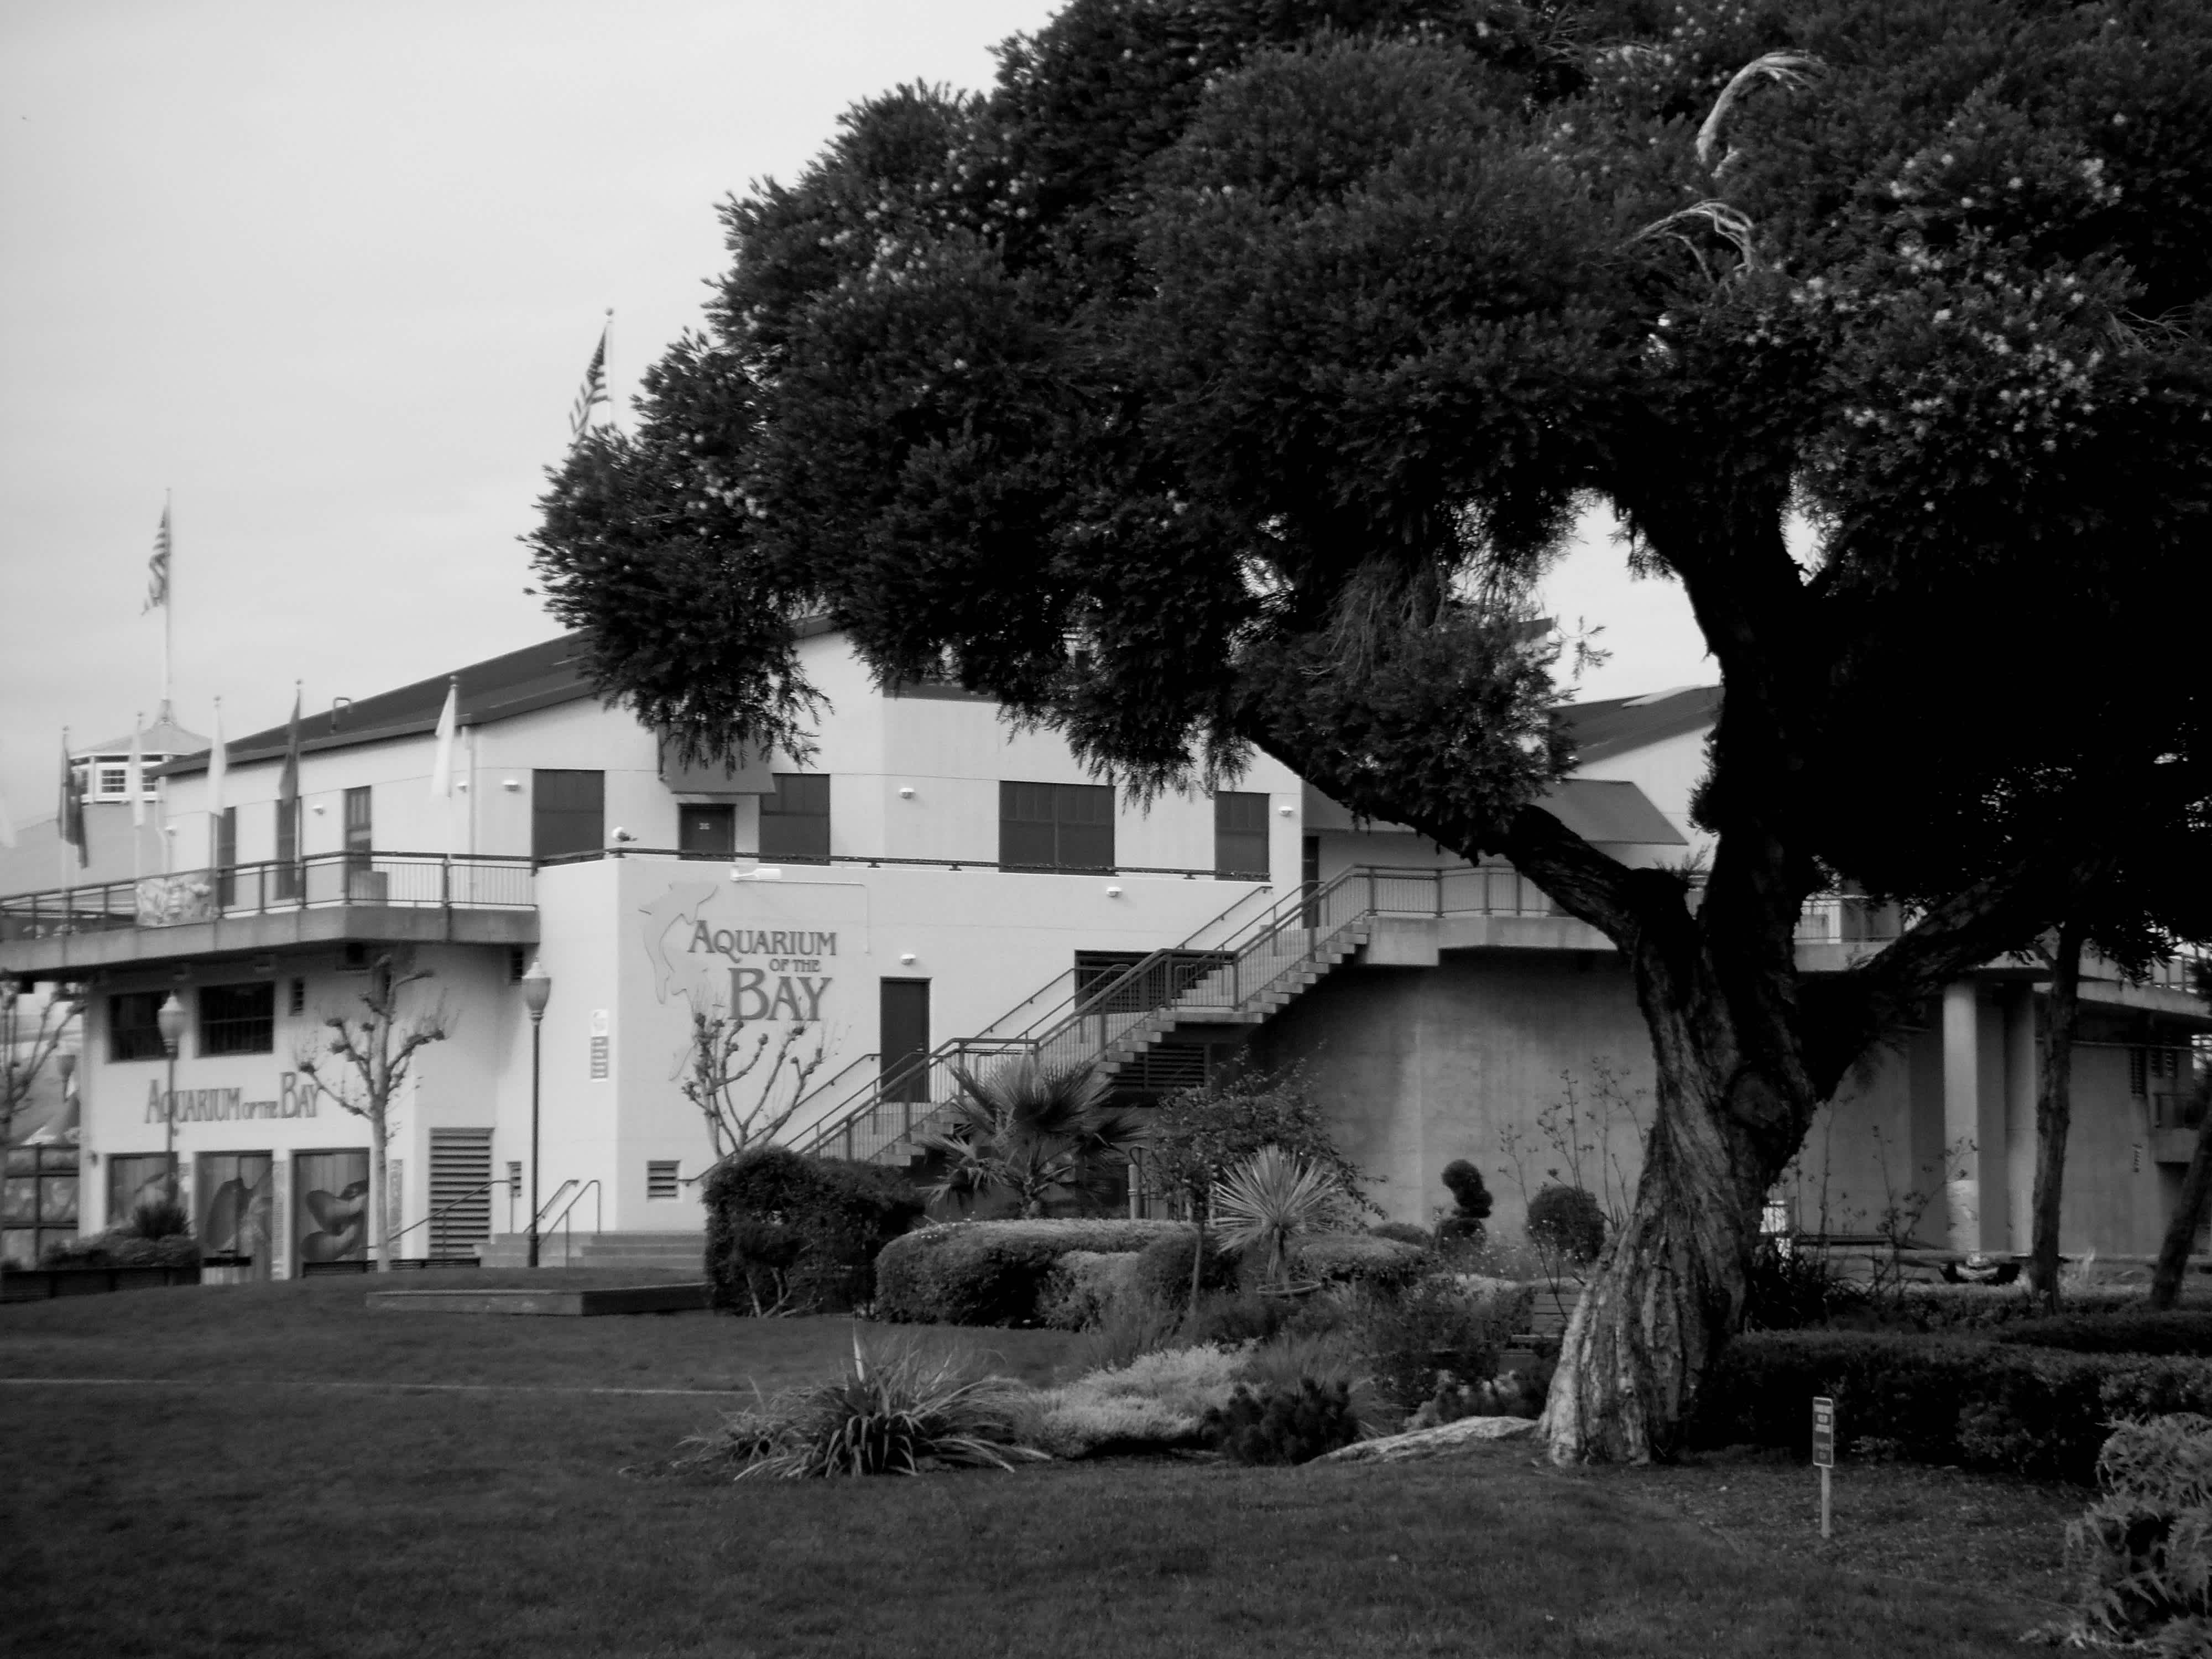 Building next to a tree in black and white in Embarcadero, San Francisco, California.